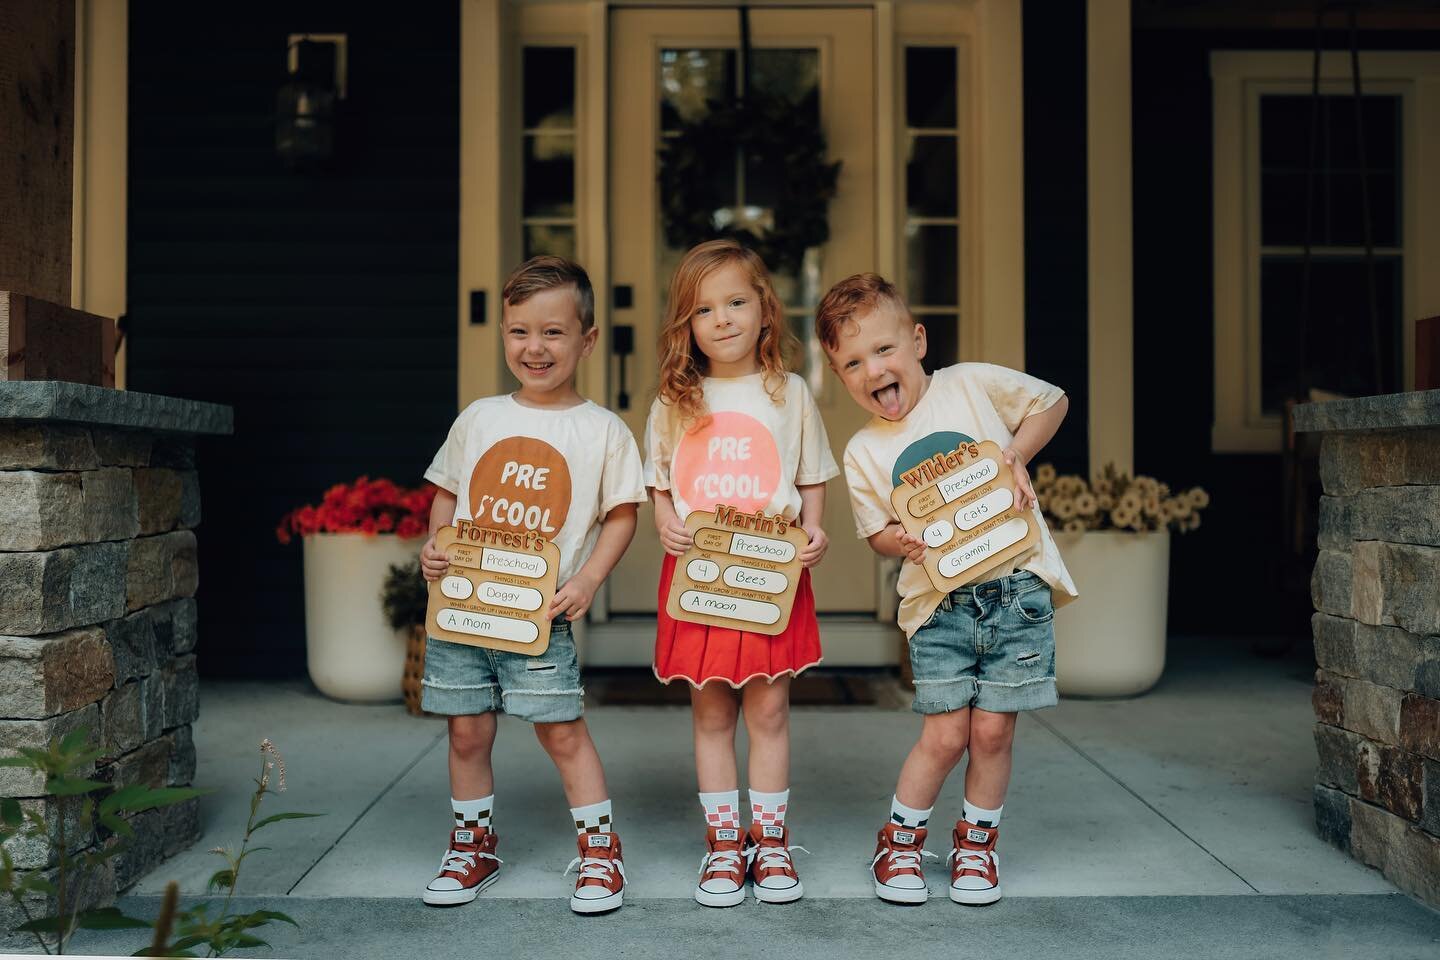 And just like that, they&rsquo;re off to Preschool 🥹 #firstdayofschool